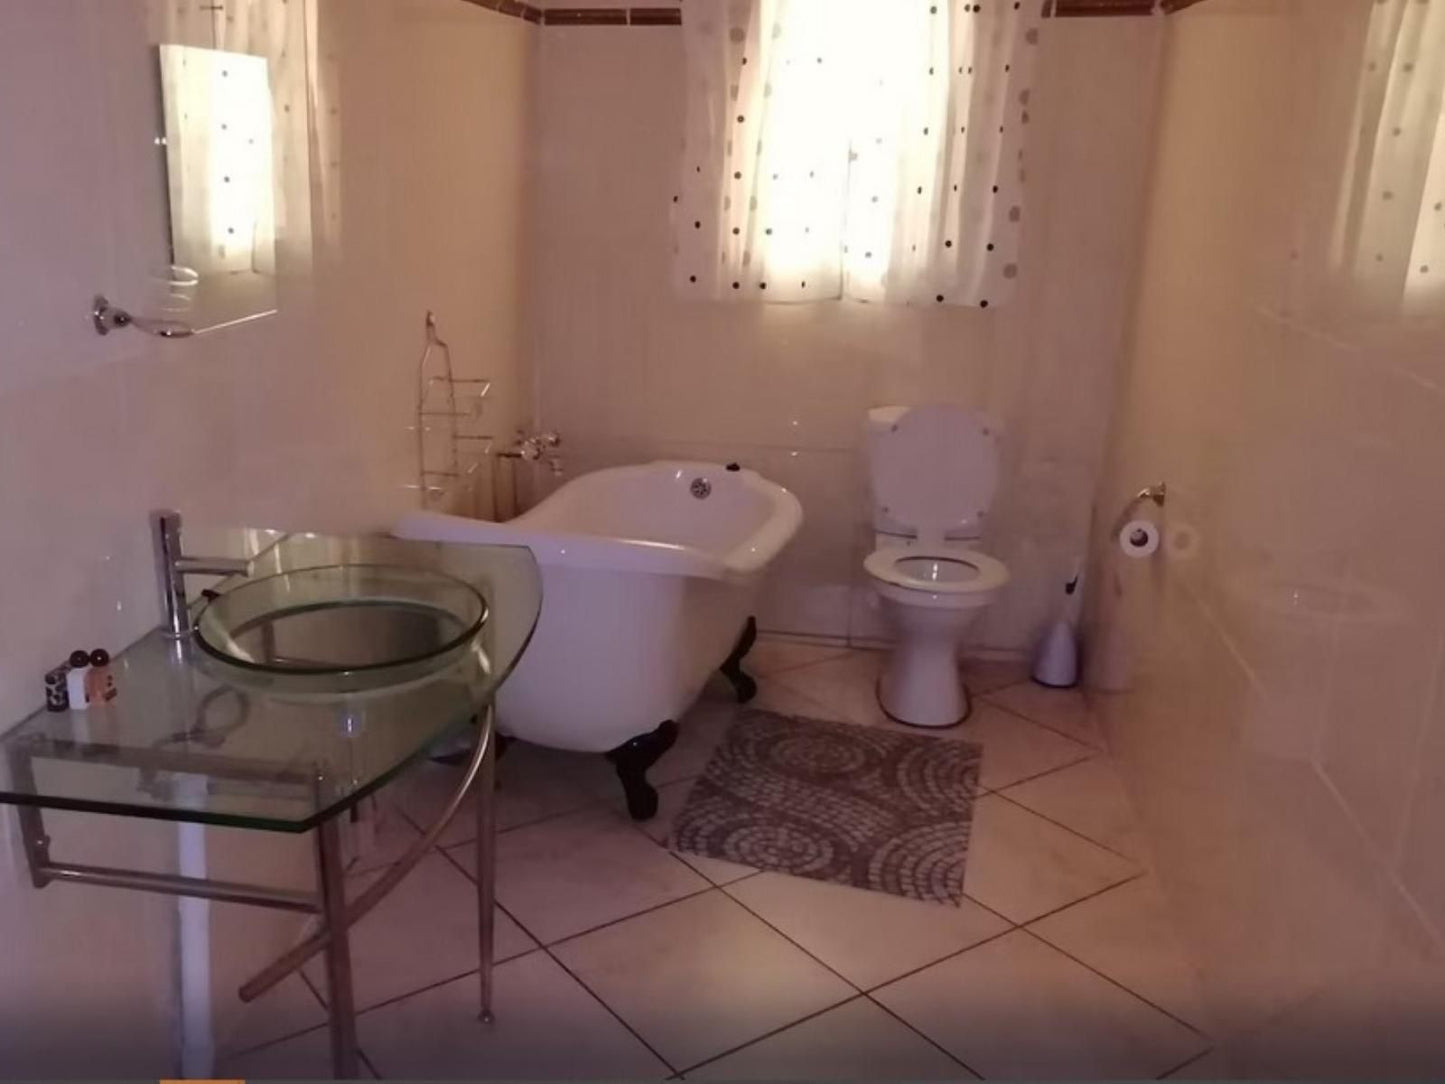 Times Premier Town Lodge Vryburg North West Province South Africa Bathroom